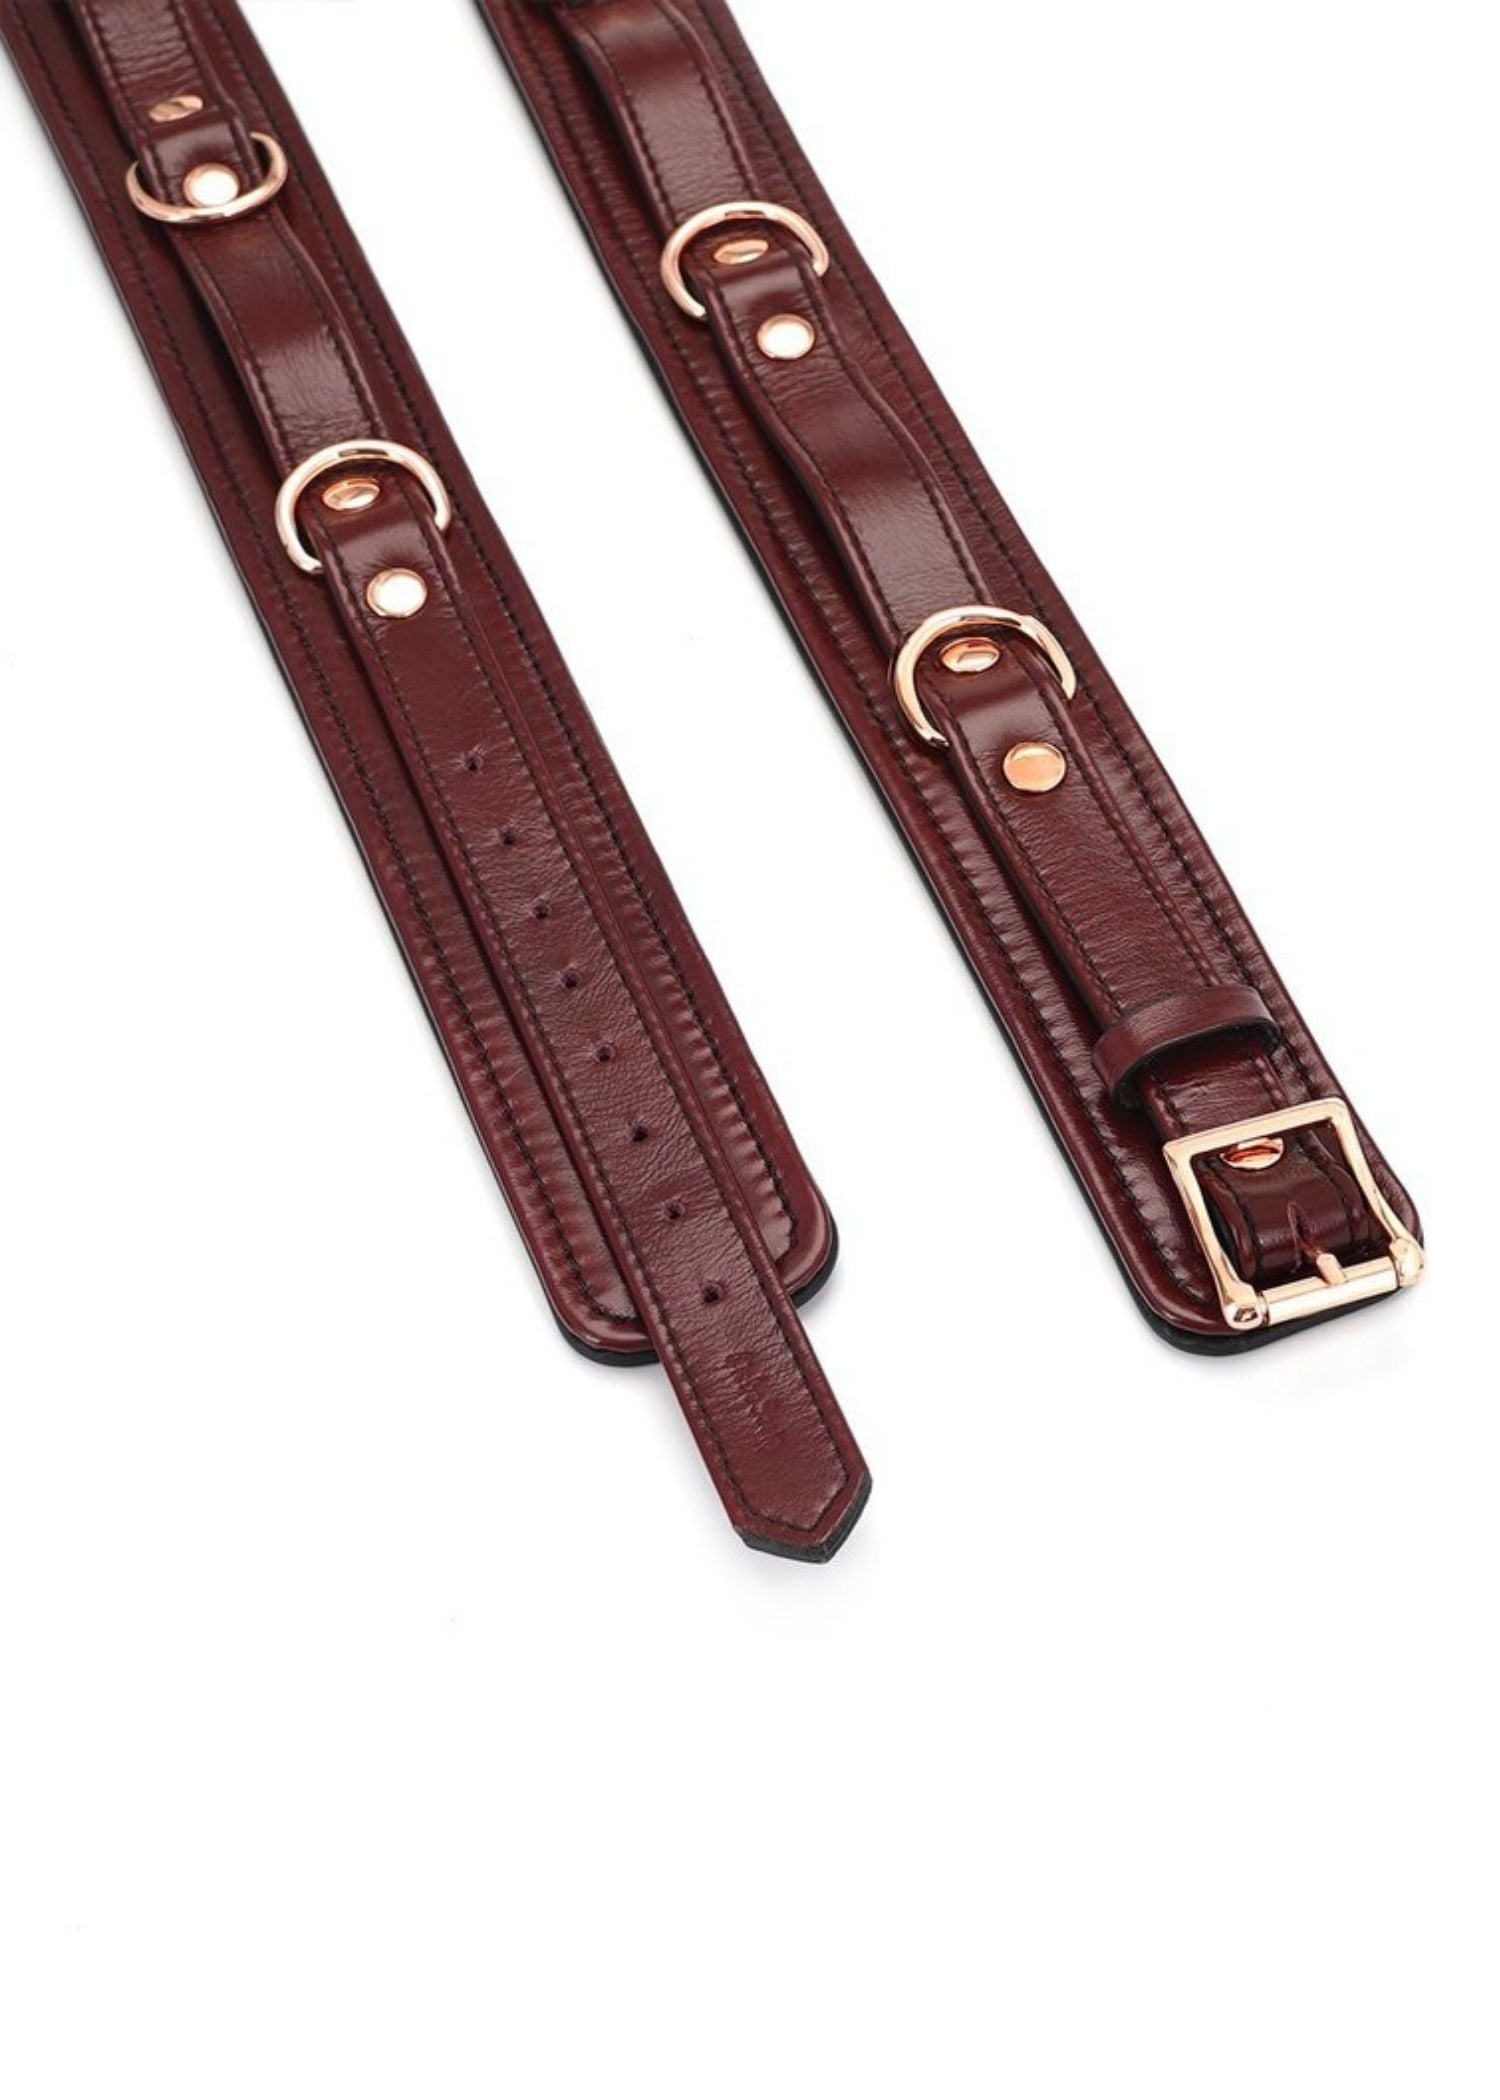 Liebe Seele Wine Red Leather Thigh Cuffs | Avec Amour